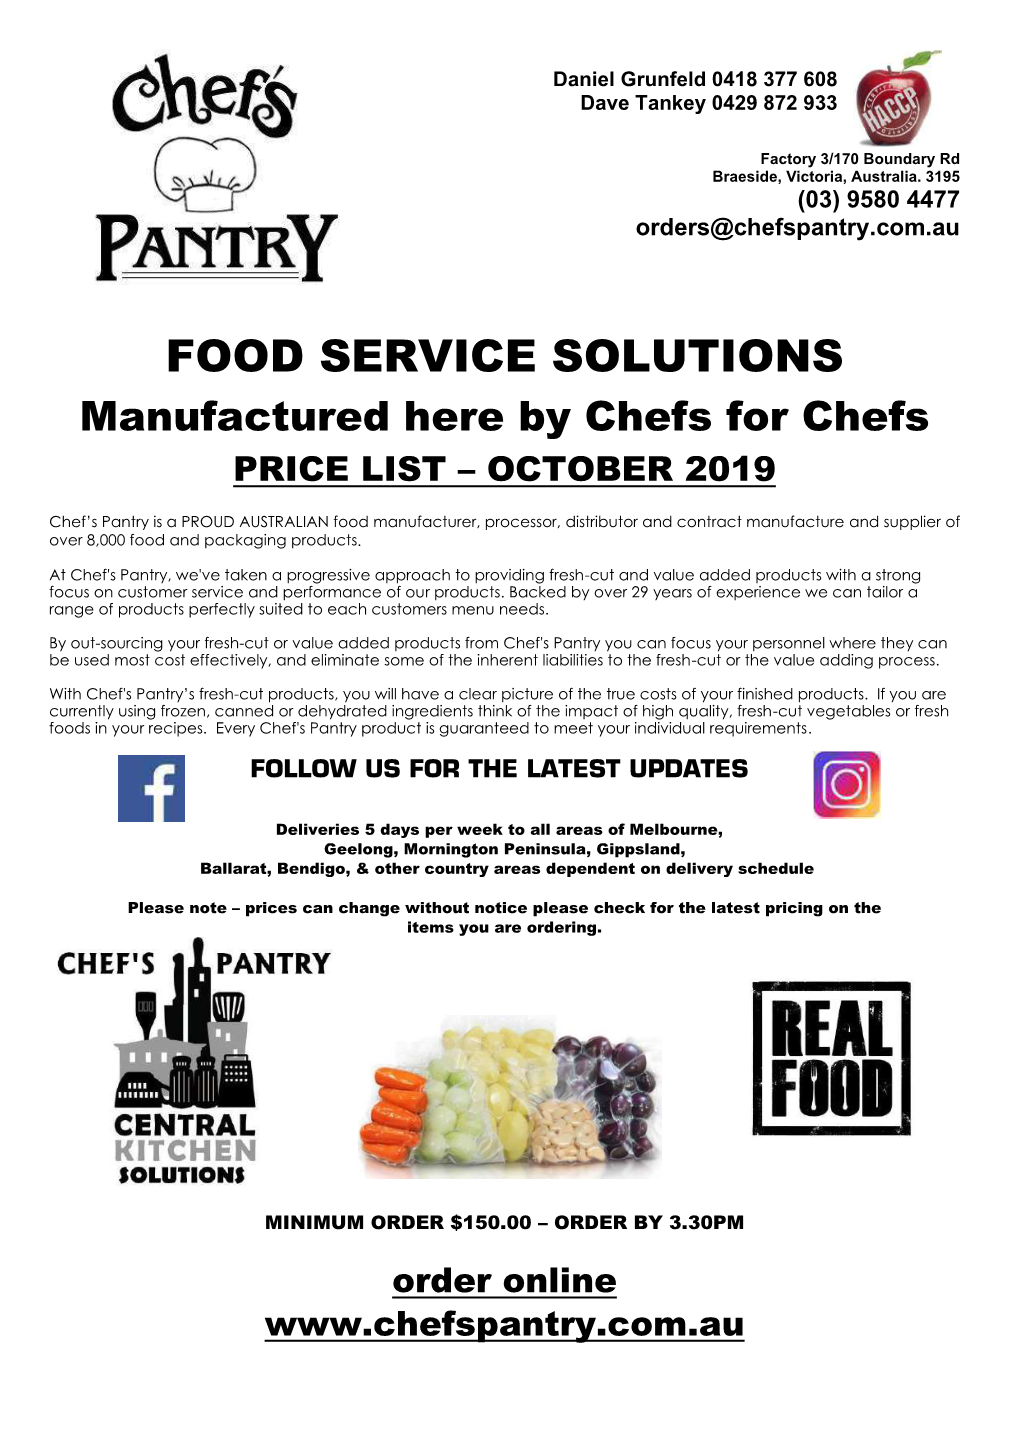 FOOD SERVICE SOLUTIONS Manufactured Here by Chefs for Chefs PRICE LIST – OCTOBER 2019